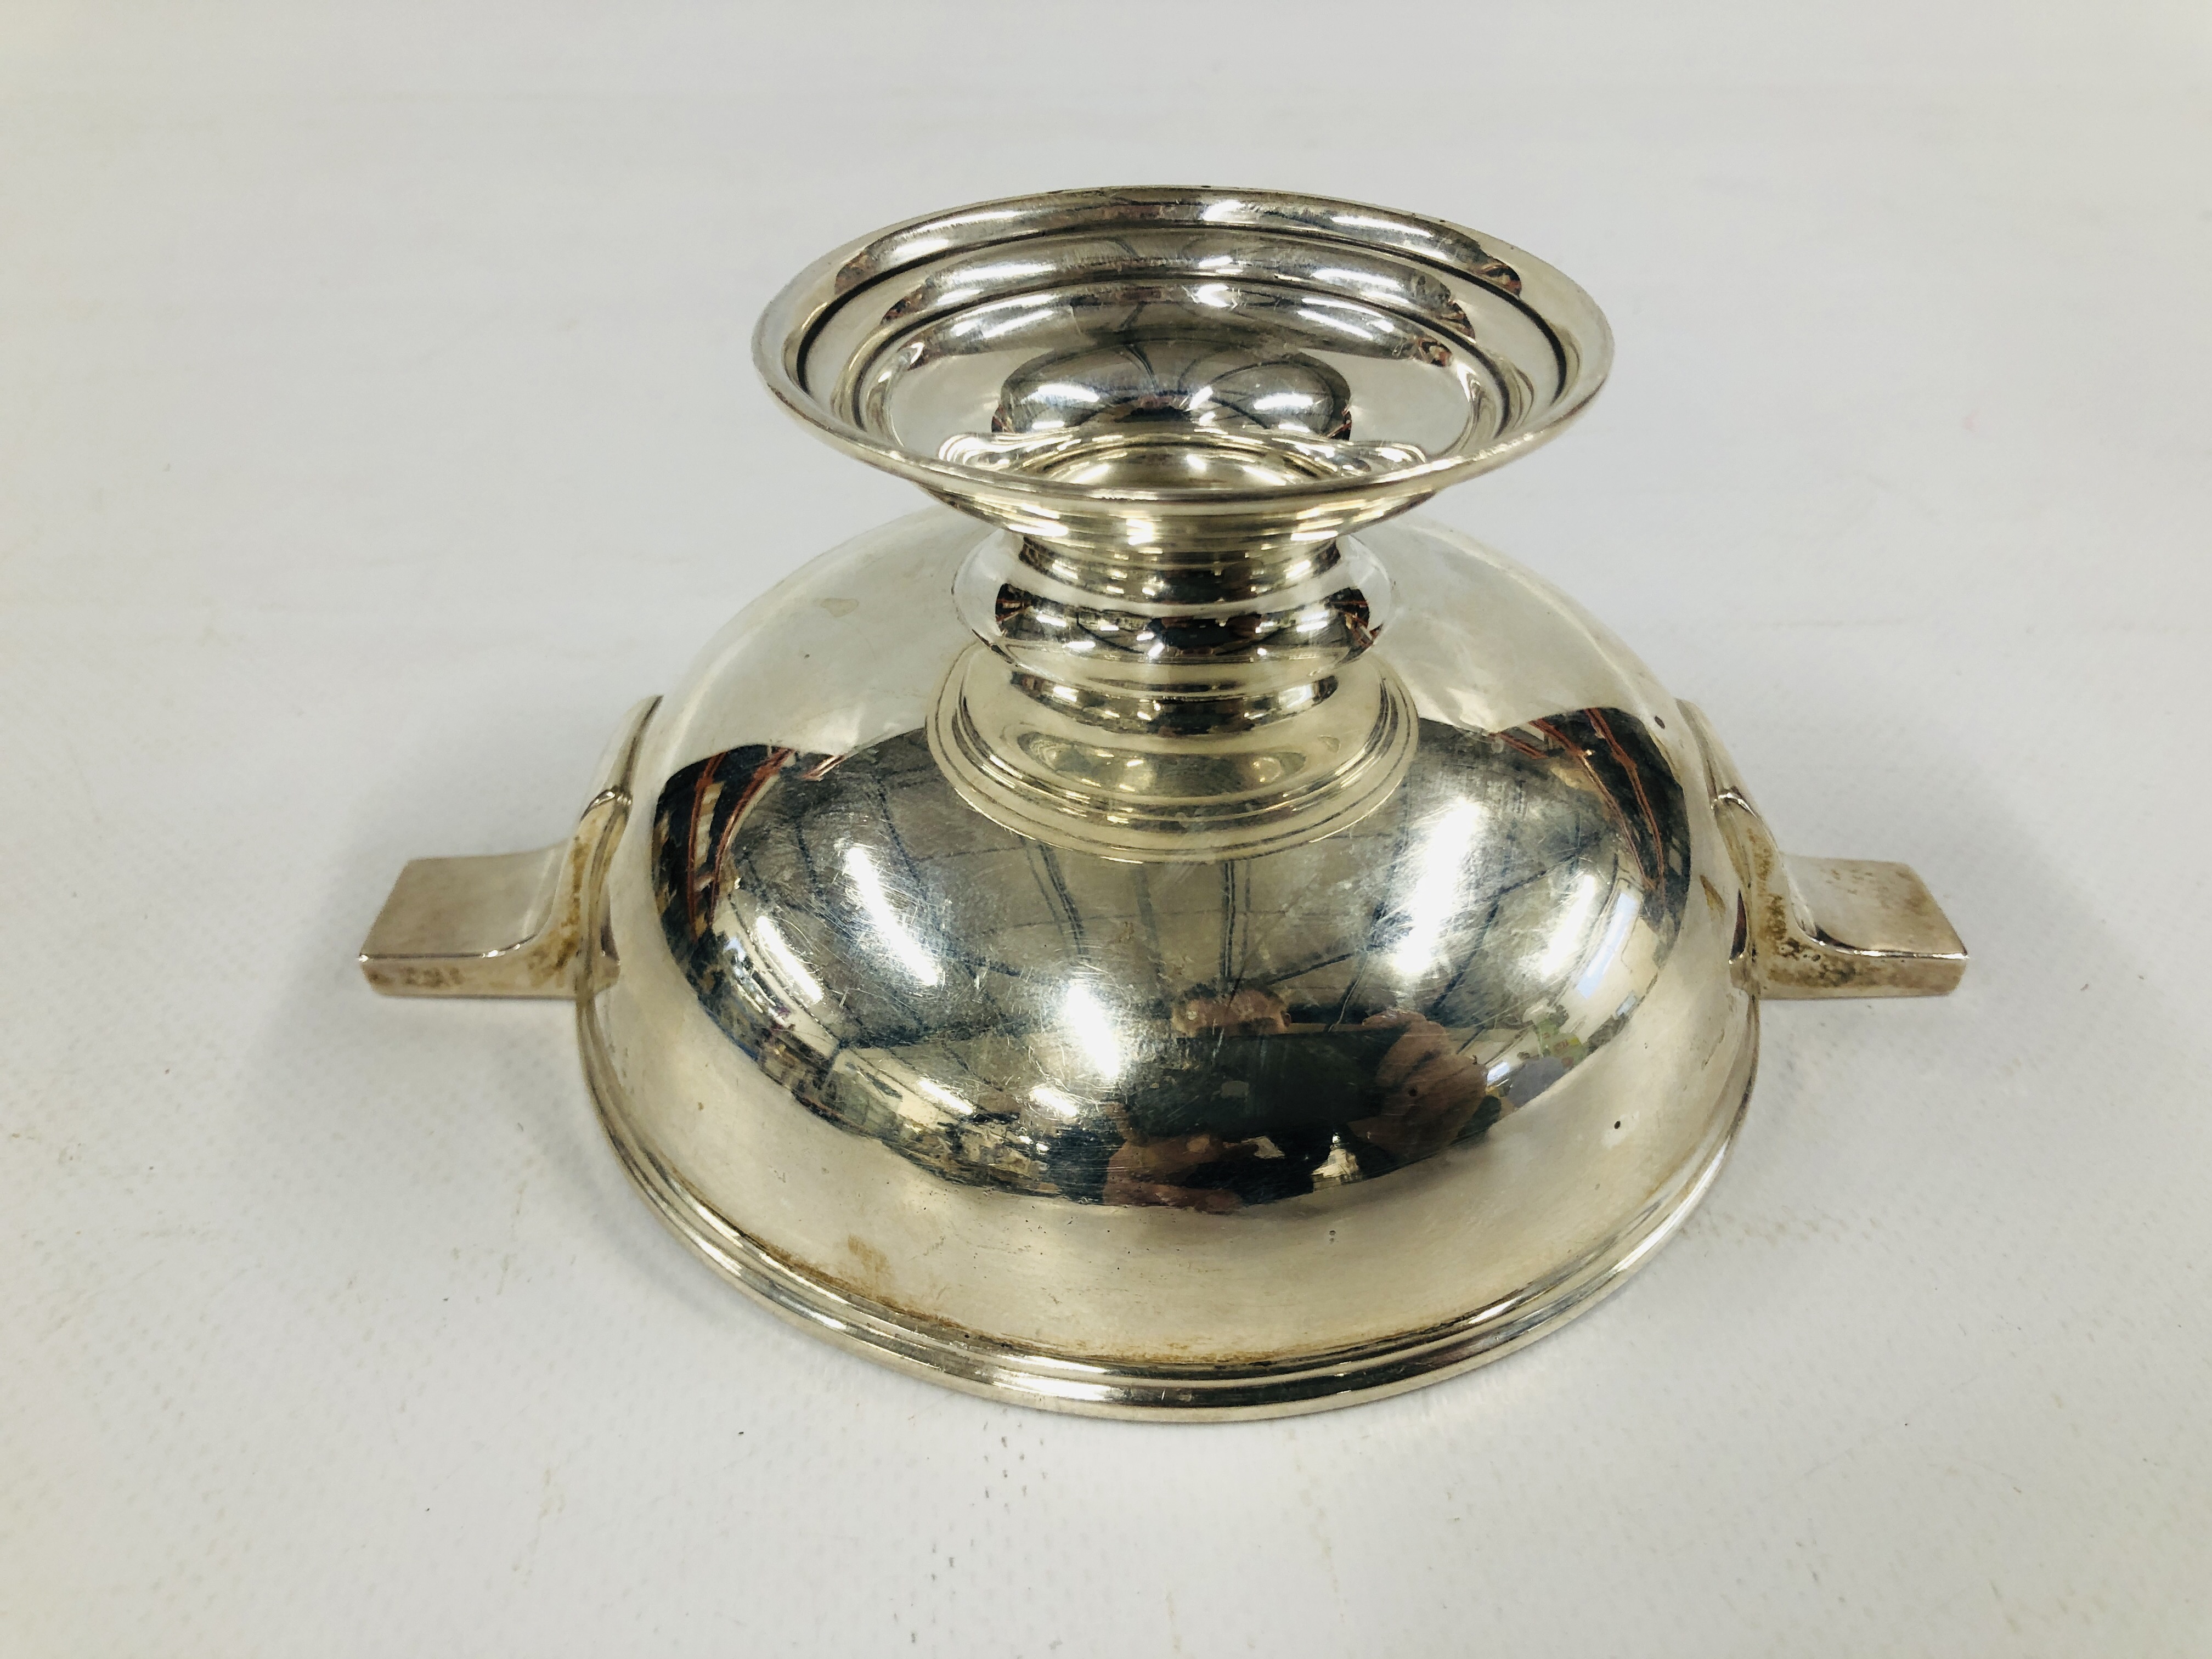 A SILVER FOOTED TWO HANDLED BOWL - BOWL DIAMETER 11.5CM. - Image 6 of 8